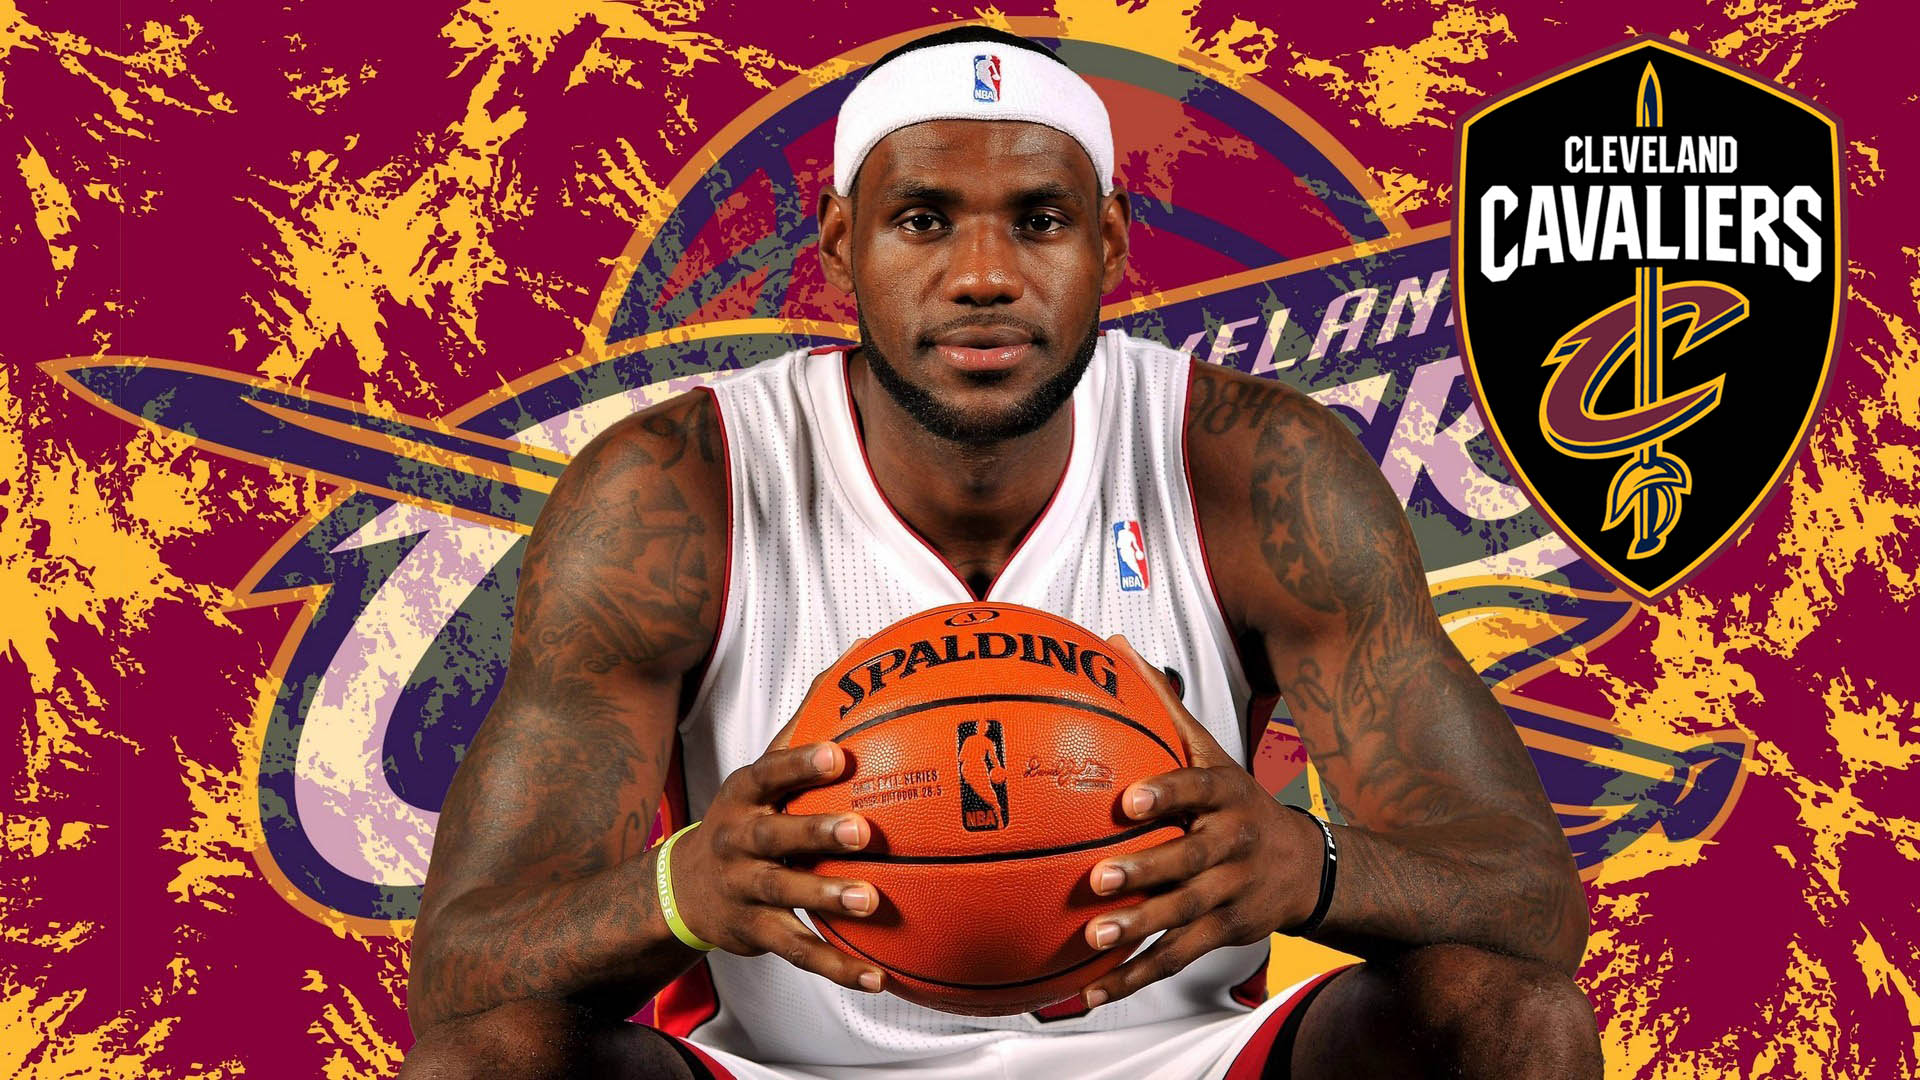 LeBron James Wallpaper For Mac Backgrounds With Resolution 1920X1080